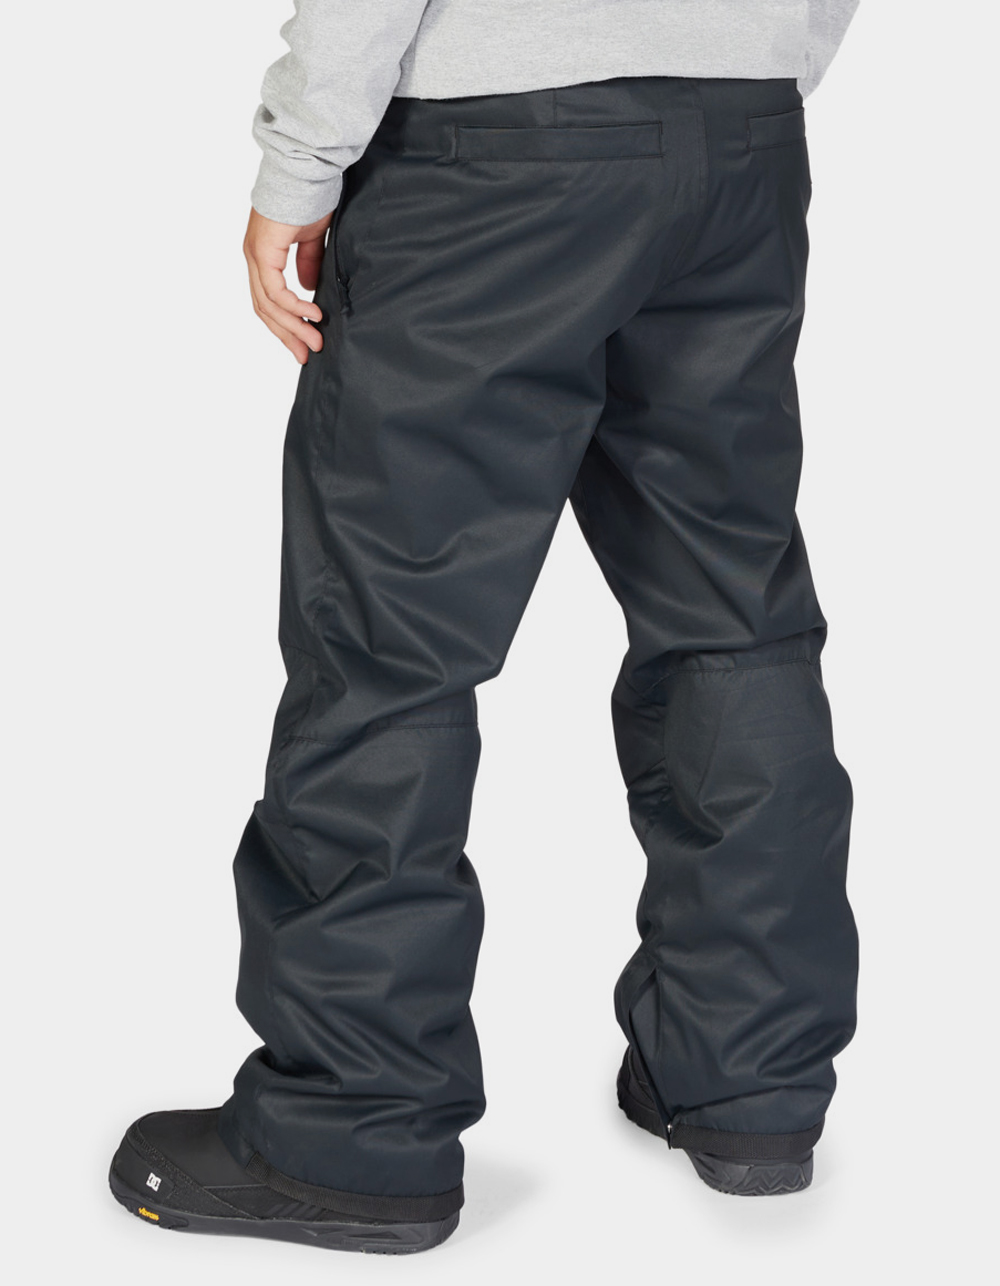 DC SHOES Cadet Mens Insulated Snowboard Pants - BLACK | Tillys